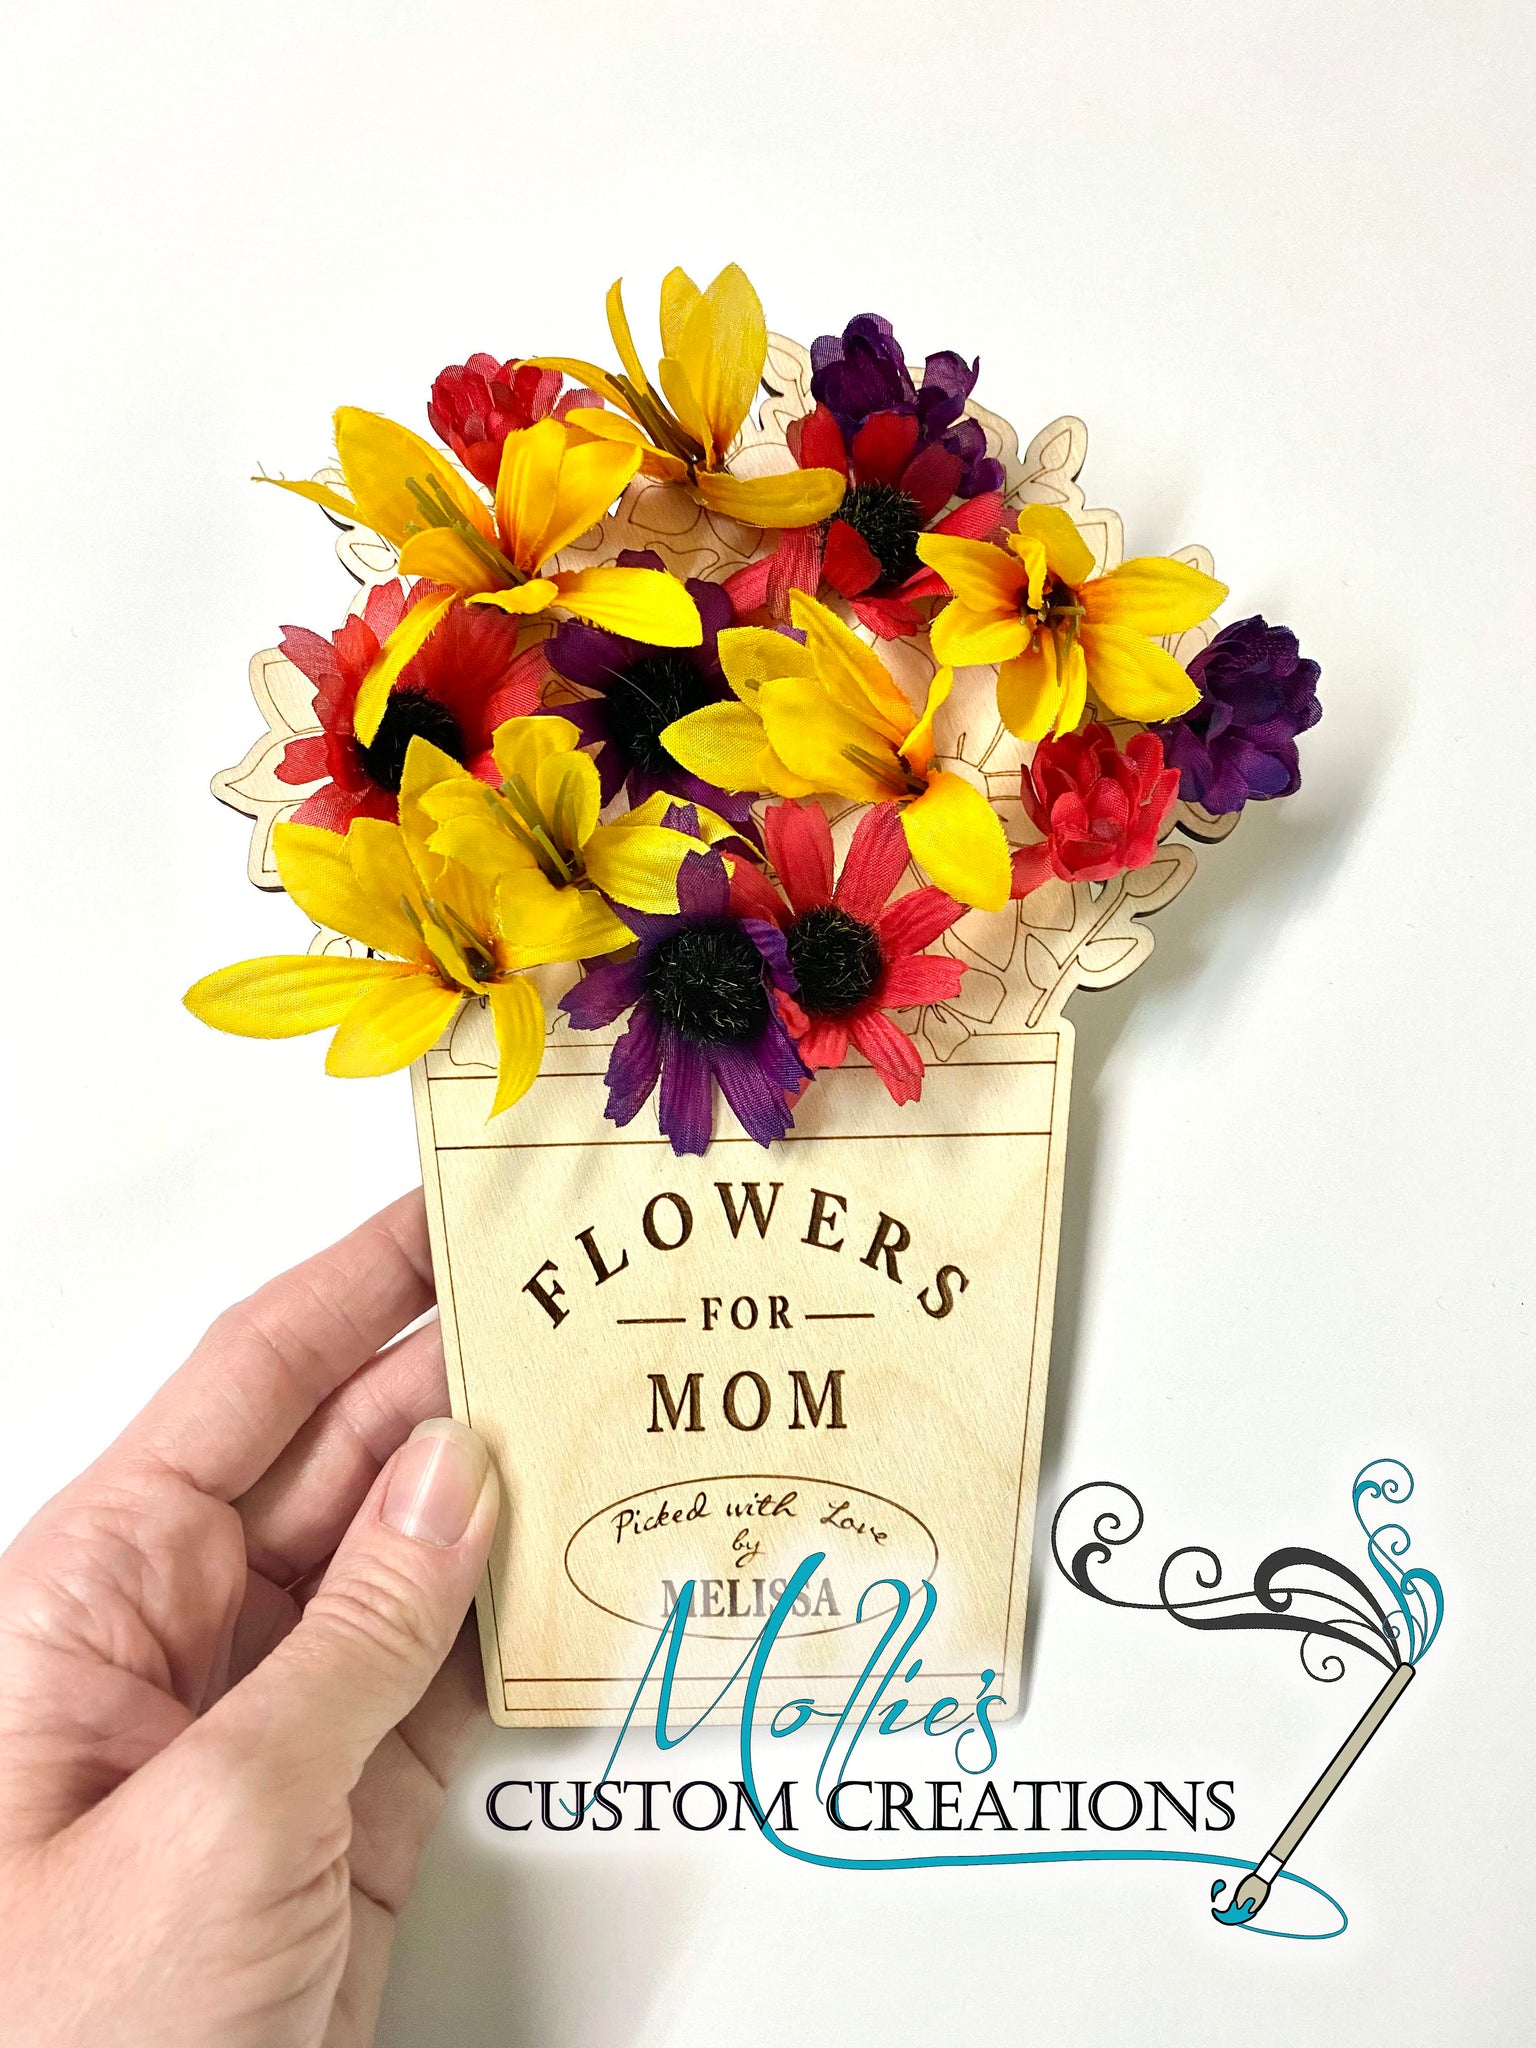 Paint Your Own Wood Flower Bouquet Mother's Day Gift Kit